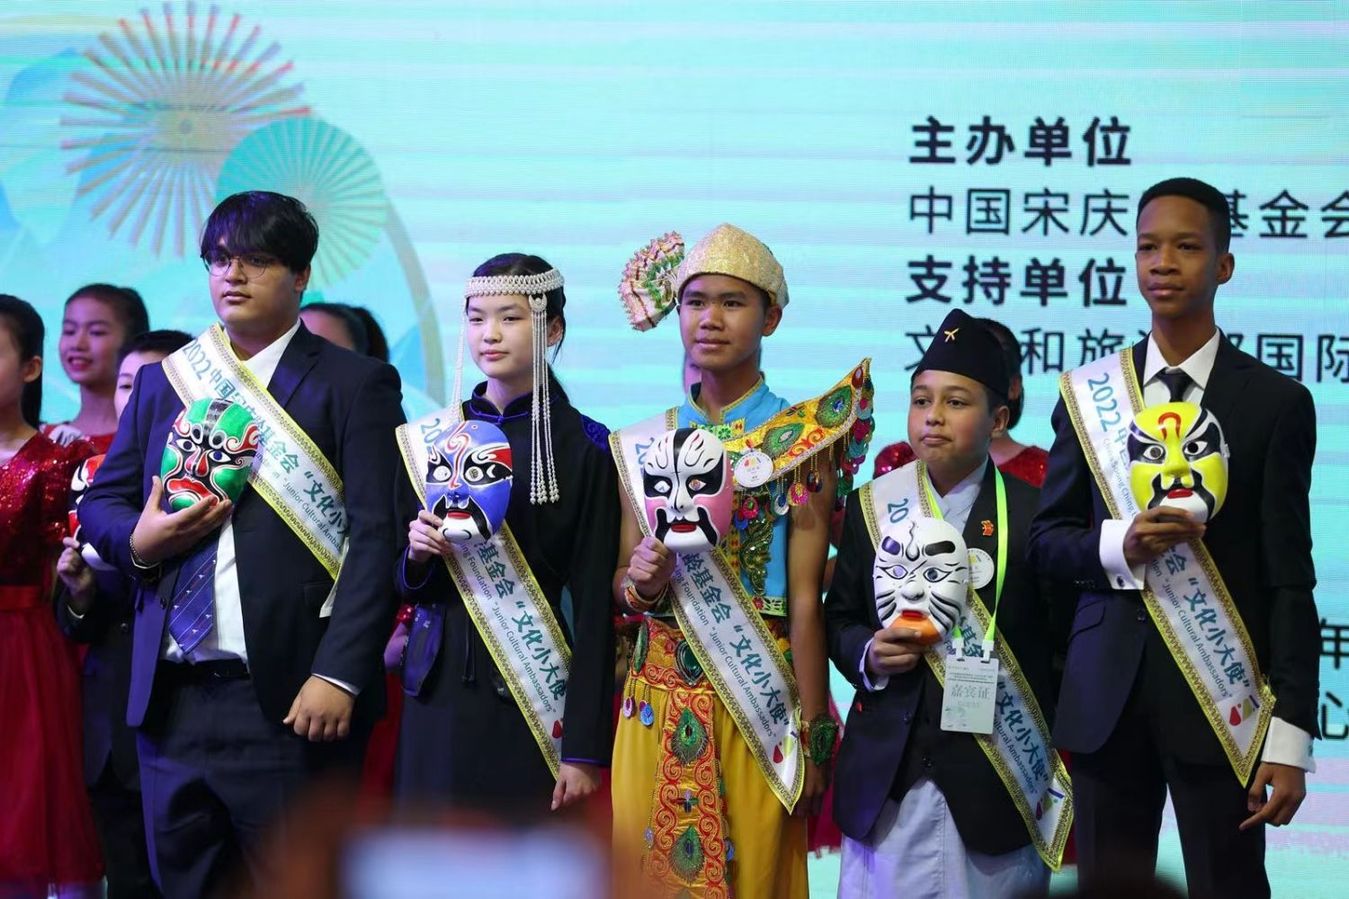 The 2022 China Soong Ching Ling Foundation “Junior Cultural Ambassadors” Event award ceremony held in Beijing【Photos】